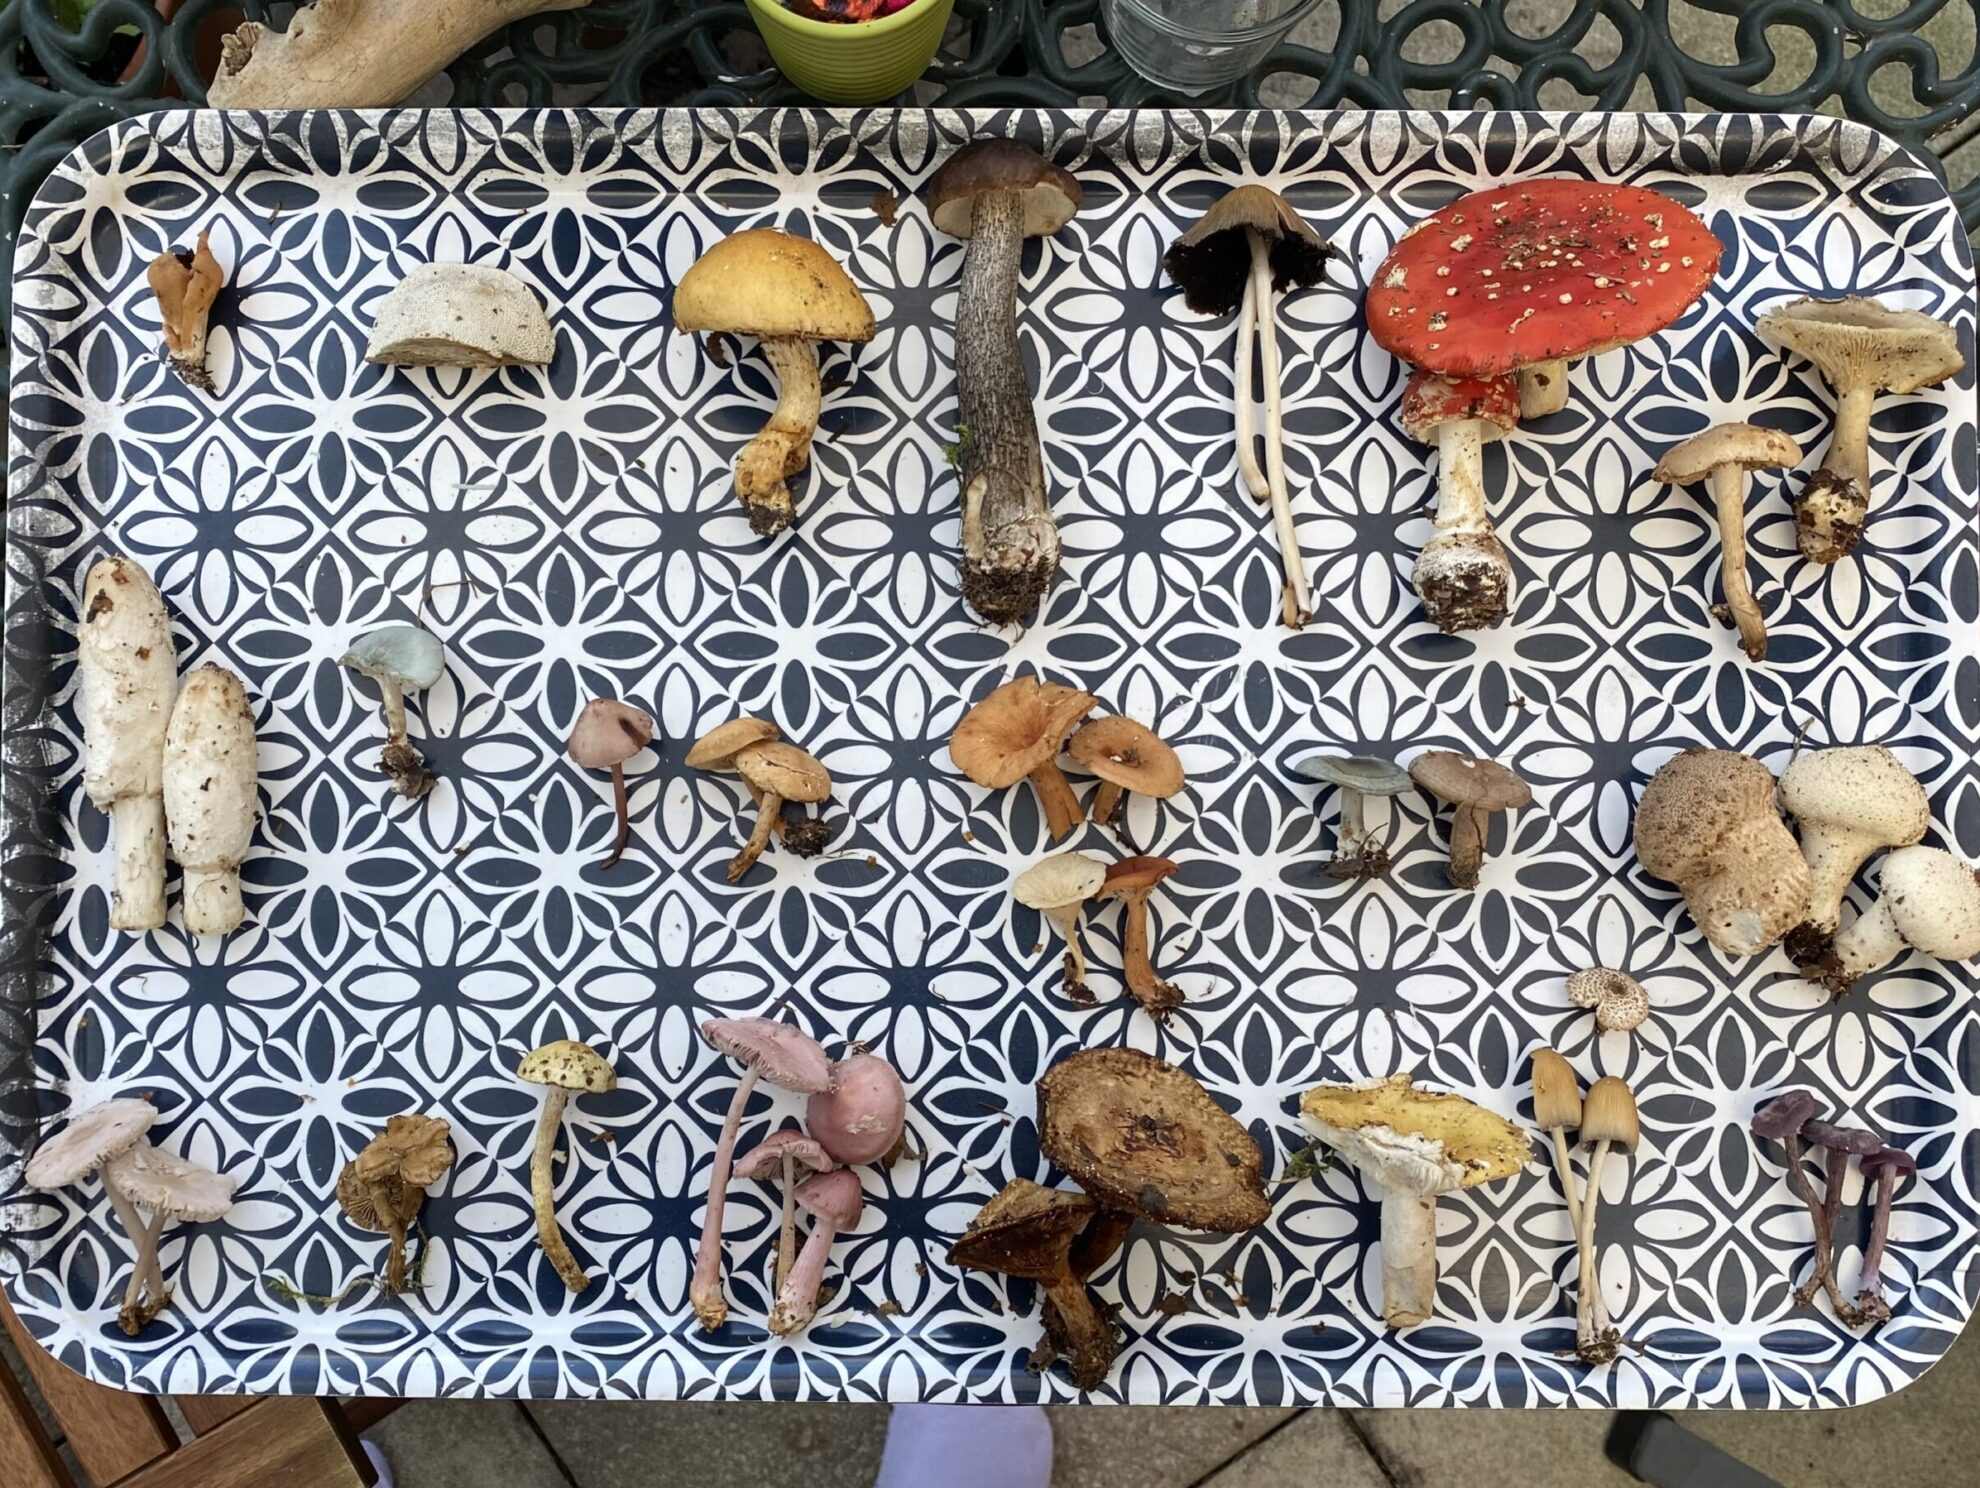 A tray of foraged fungi displaying 24 different varieties in many colors, shapes and sizes.  All collected on a single foraging excursion.